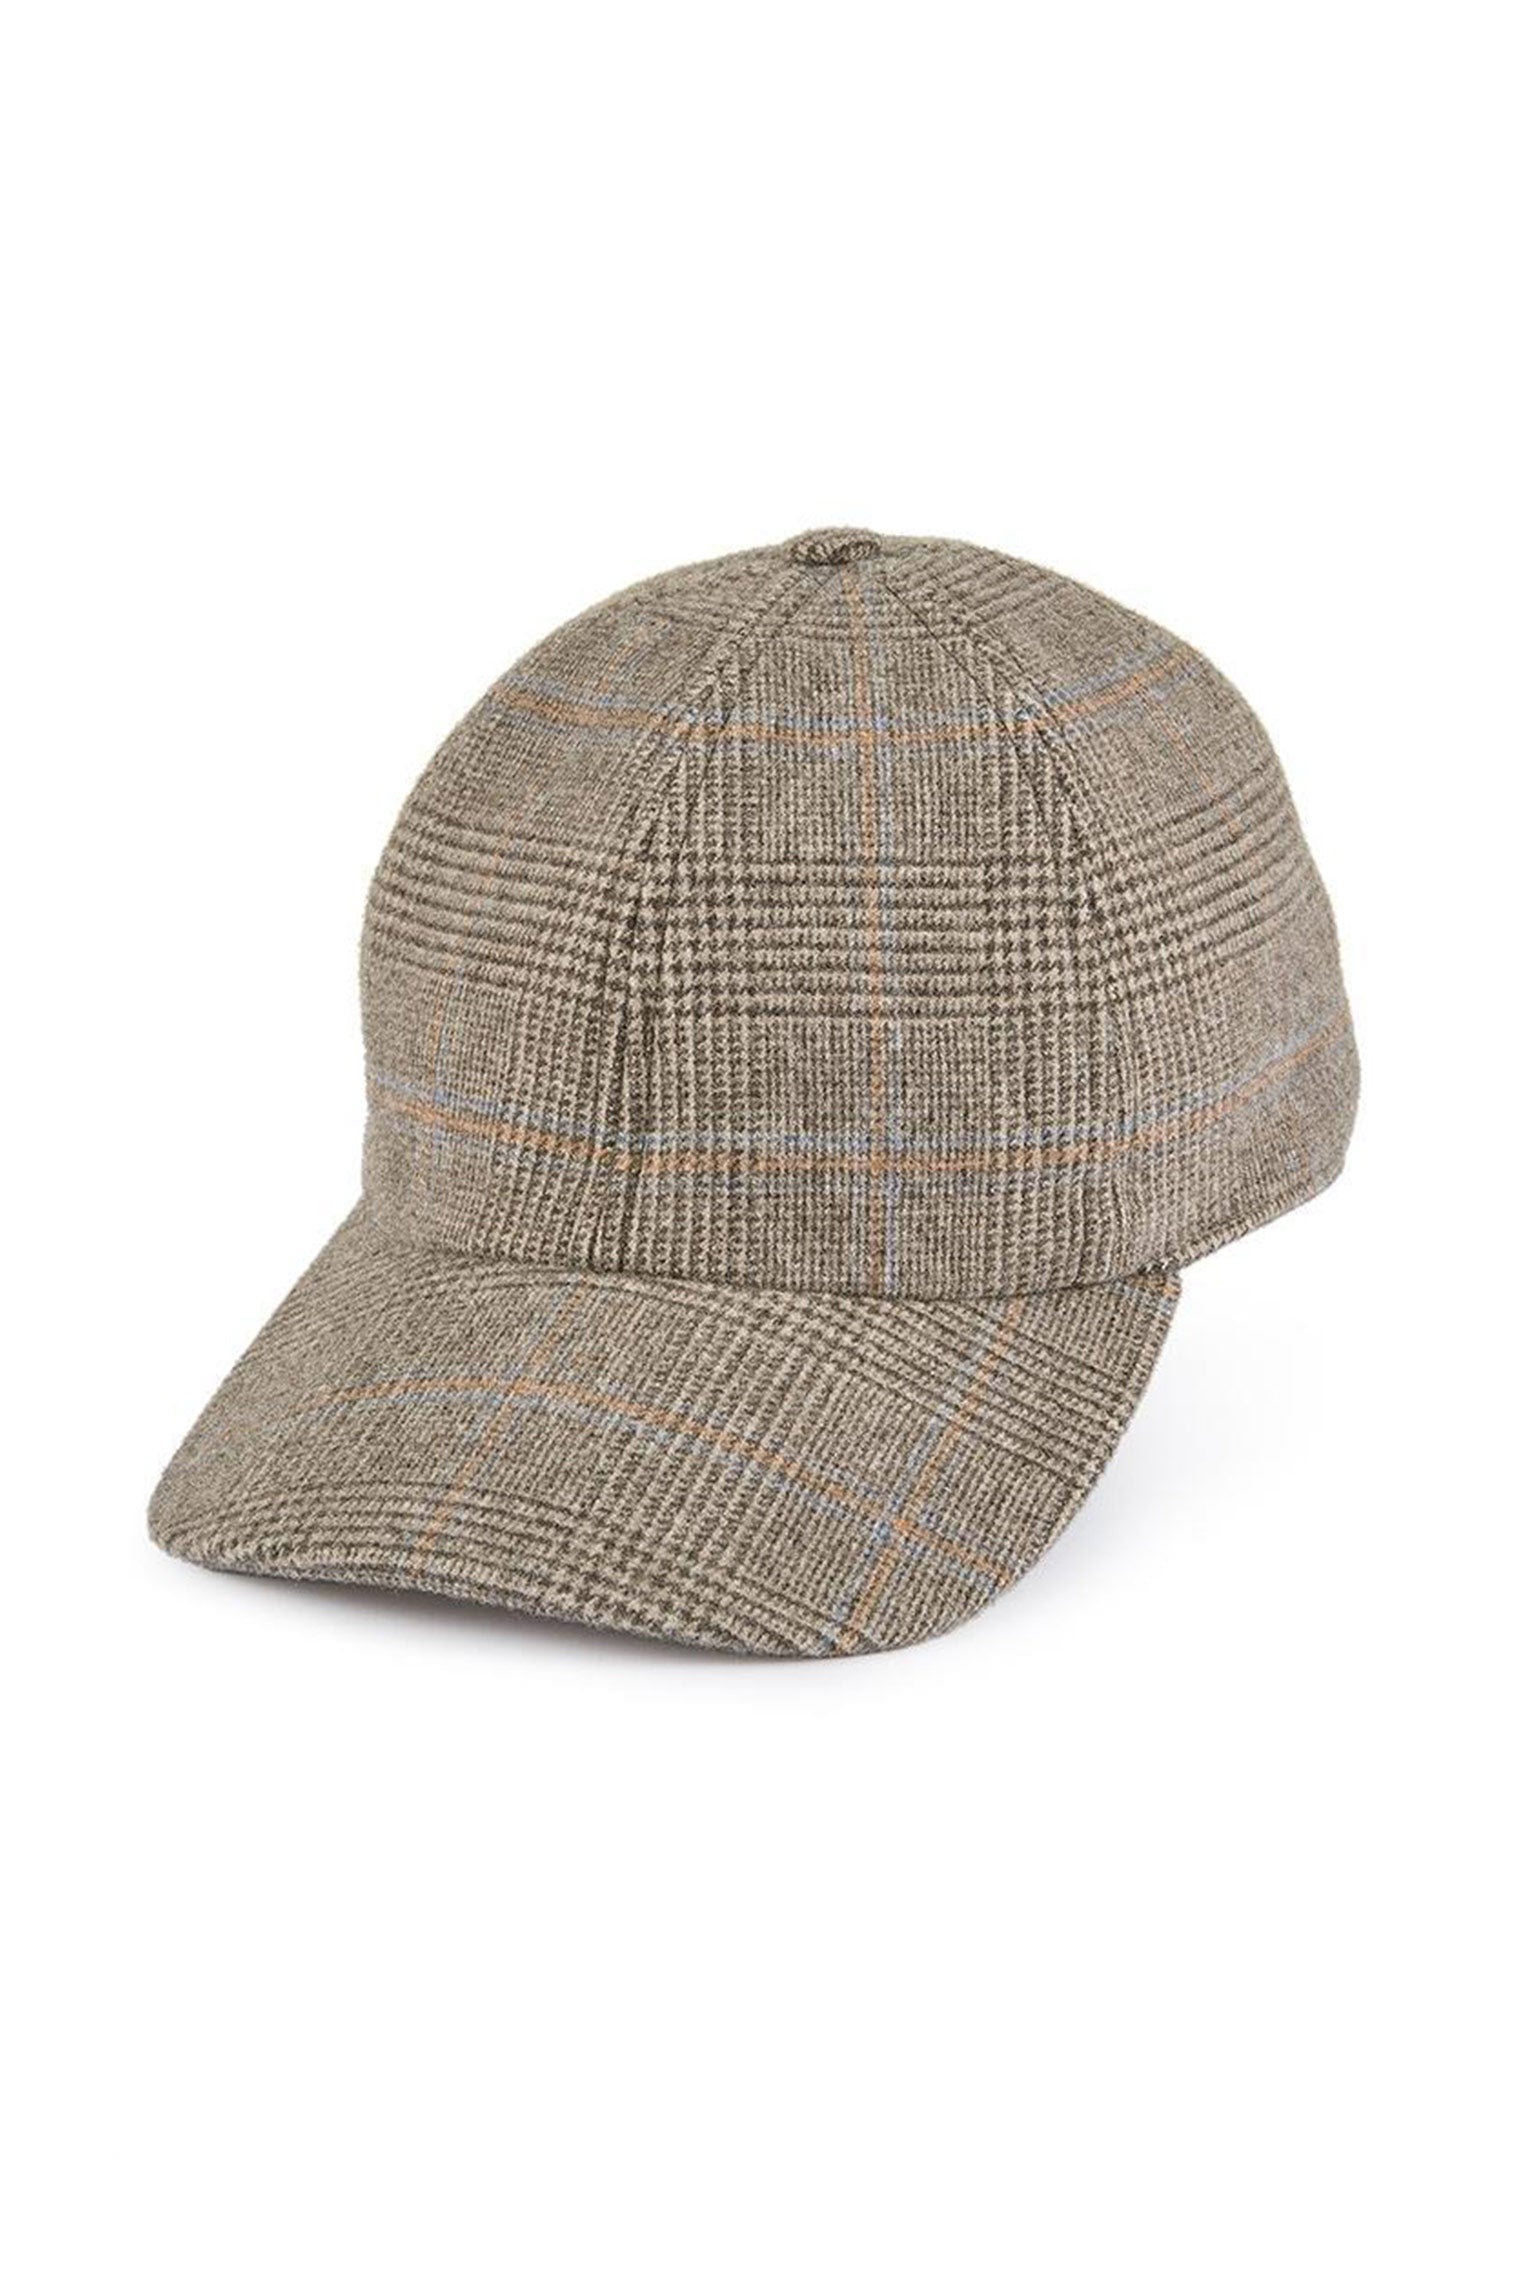 Escorial Wool Baseball Cap - Hats for Square Face Shapes - Lock & Co. Hatters London UK